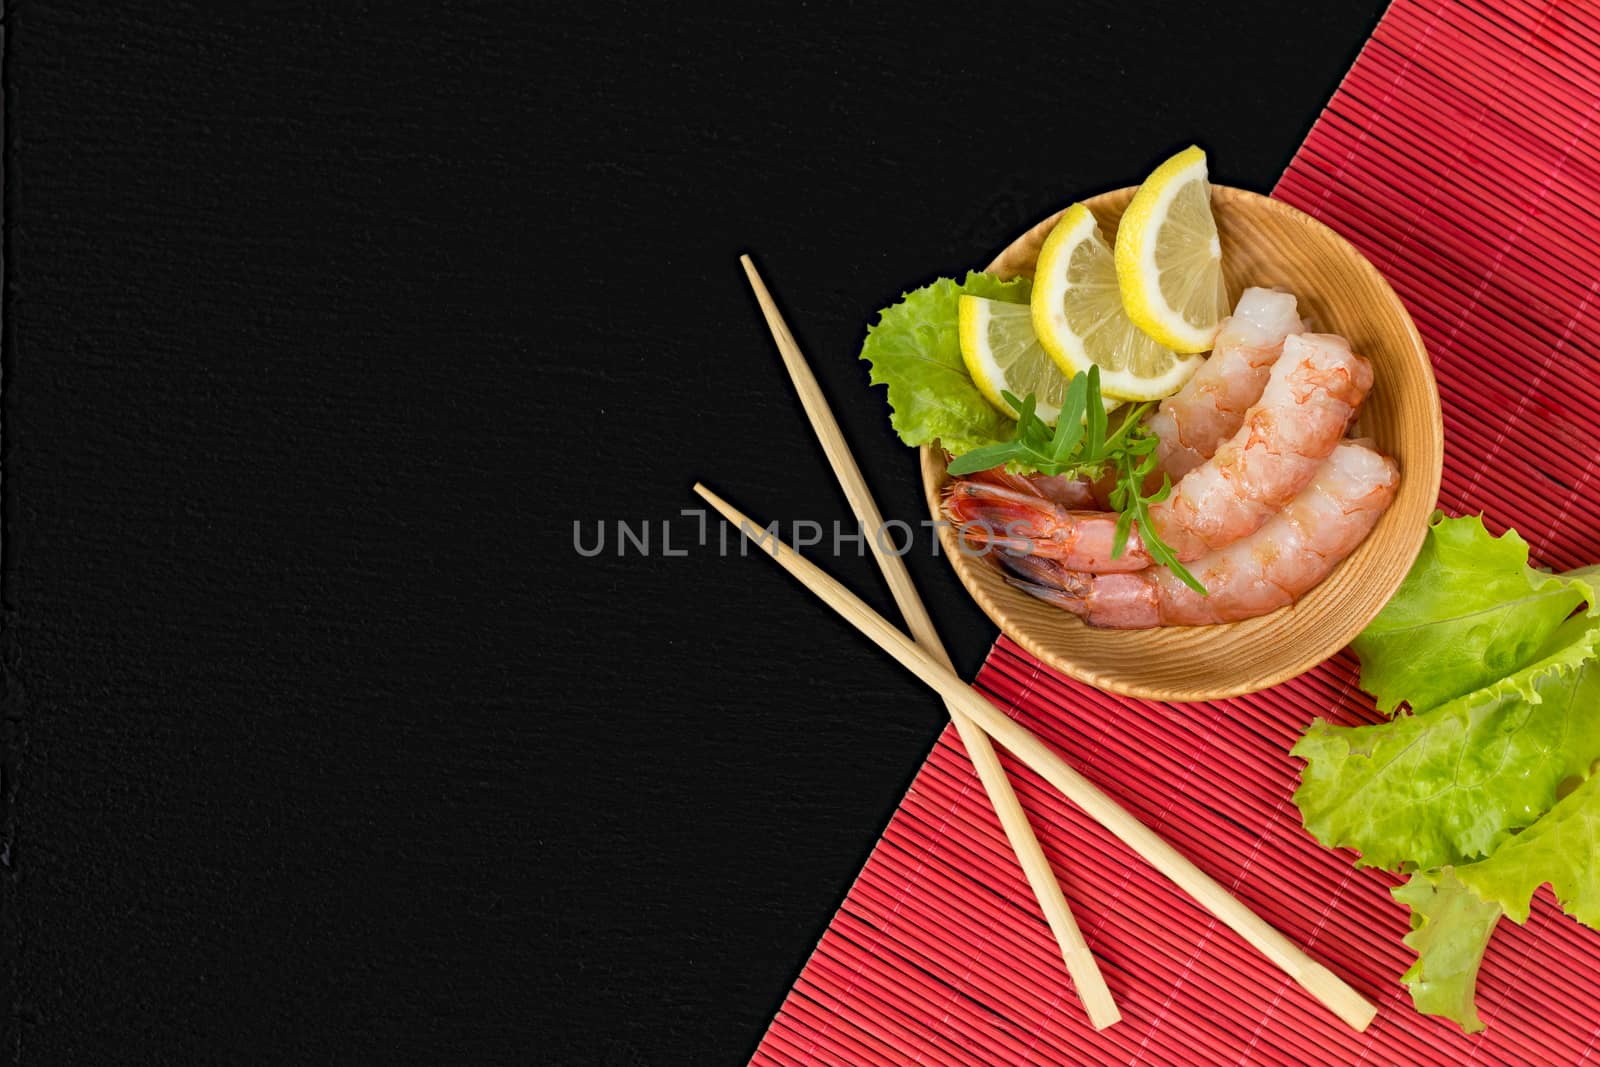 Cooked peeled shrimps with lemon slices, green lettuce and arugula leaves on a wooden plate with wooden chopsticks crossed. The plate, chopsticks and green lettuce leaves are on red makisu